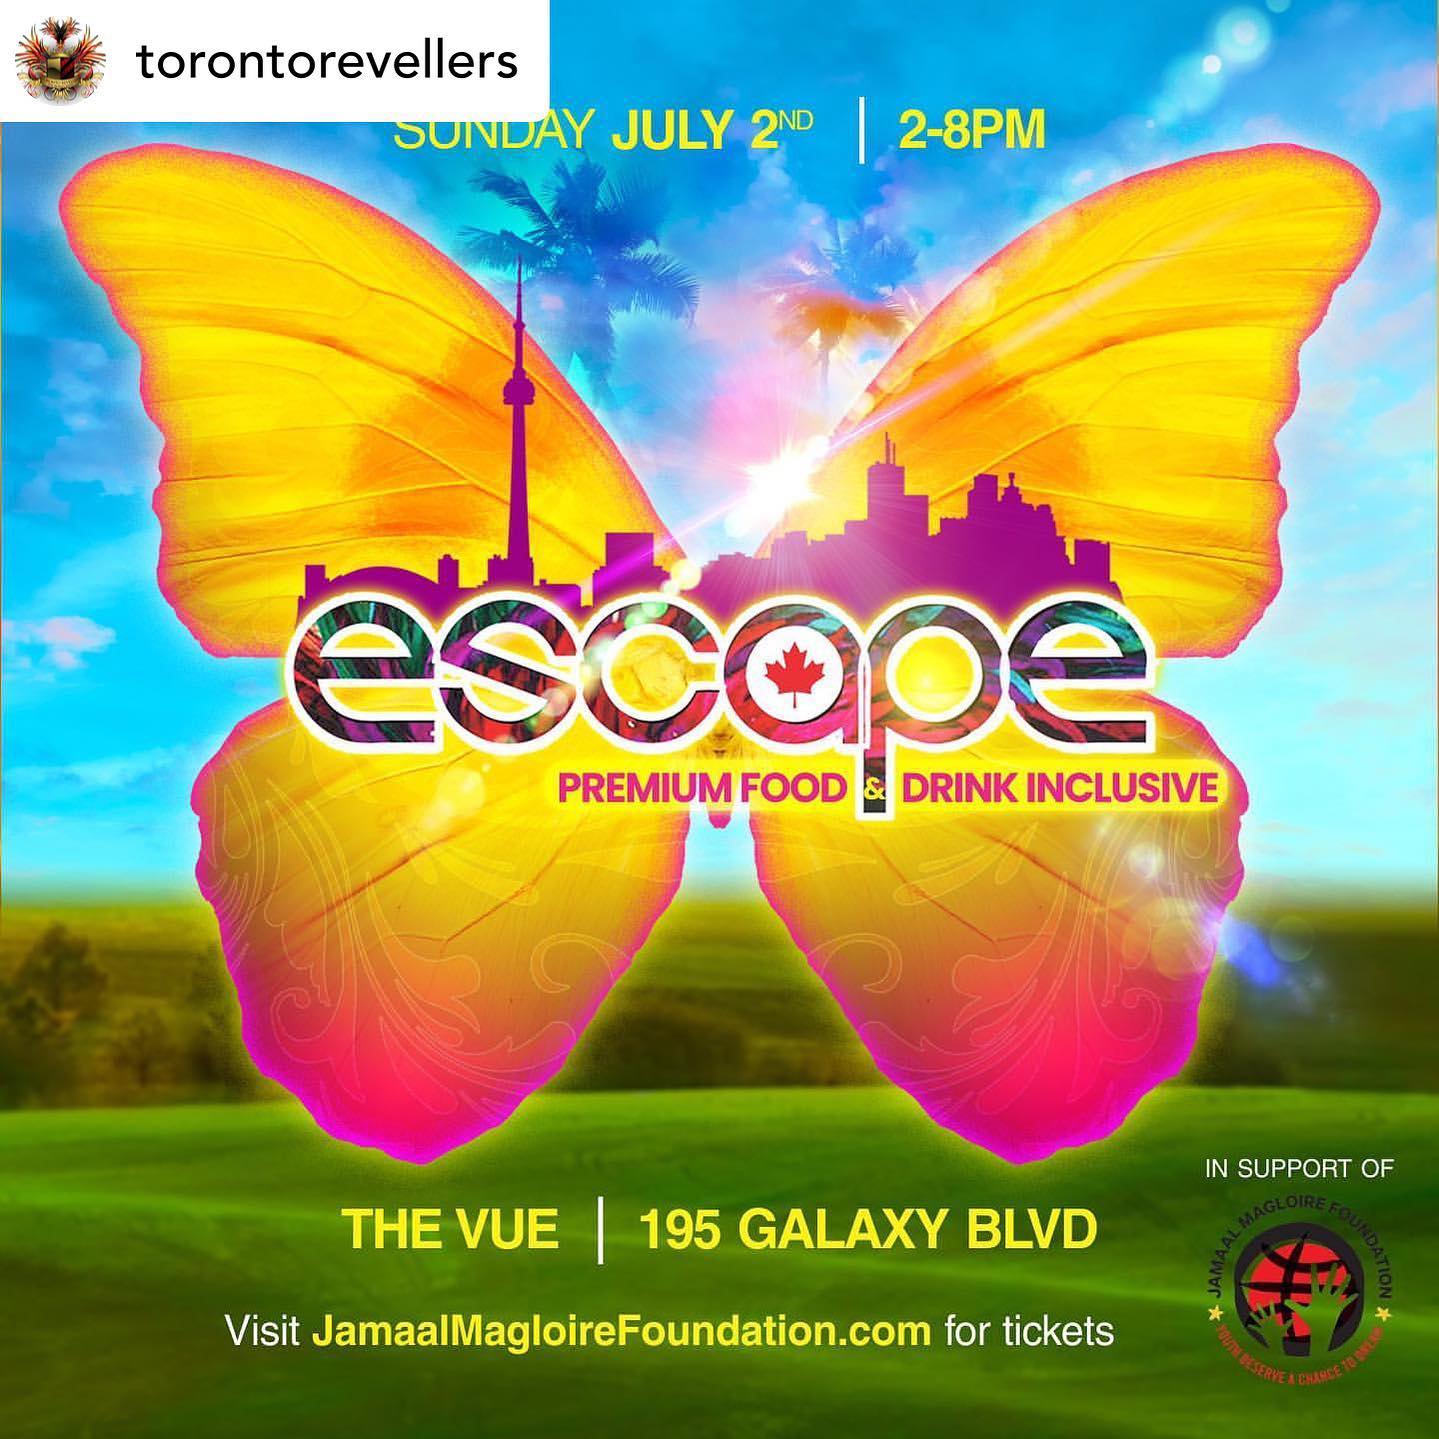 ESCAPE All Inclusive🦋 in support of Jamaal Magloire Foundation is back New venue  More capacity  Bigger and better than ever! 

July 2, 2023
The Vue, 195 Galaxy Blvd

Early bird tickets for the ultimate Canada Day 🇨🇦 event go on sale this week, with an EXCITING announcement 

Turn on post notifications to be the first to be in the know.